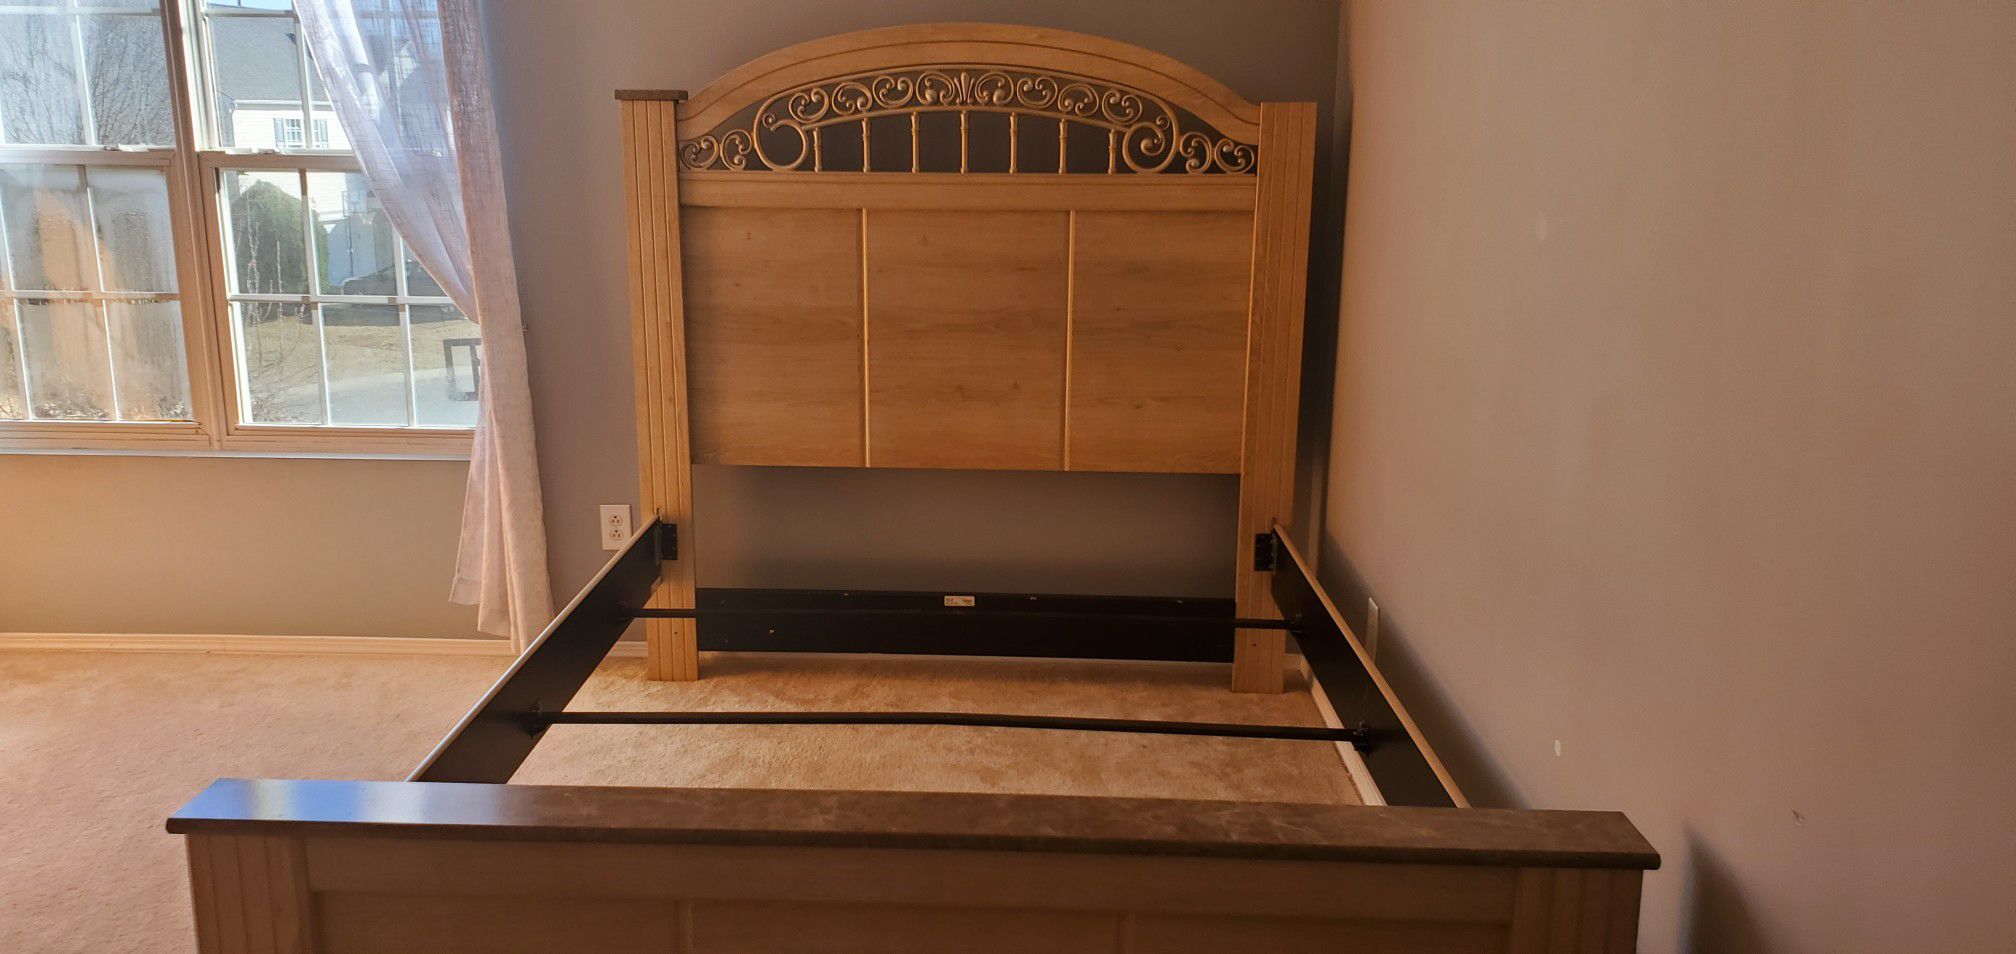 Queen size Bed Frame